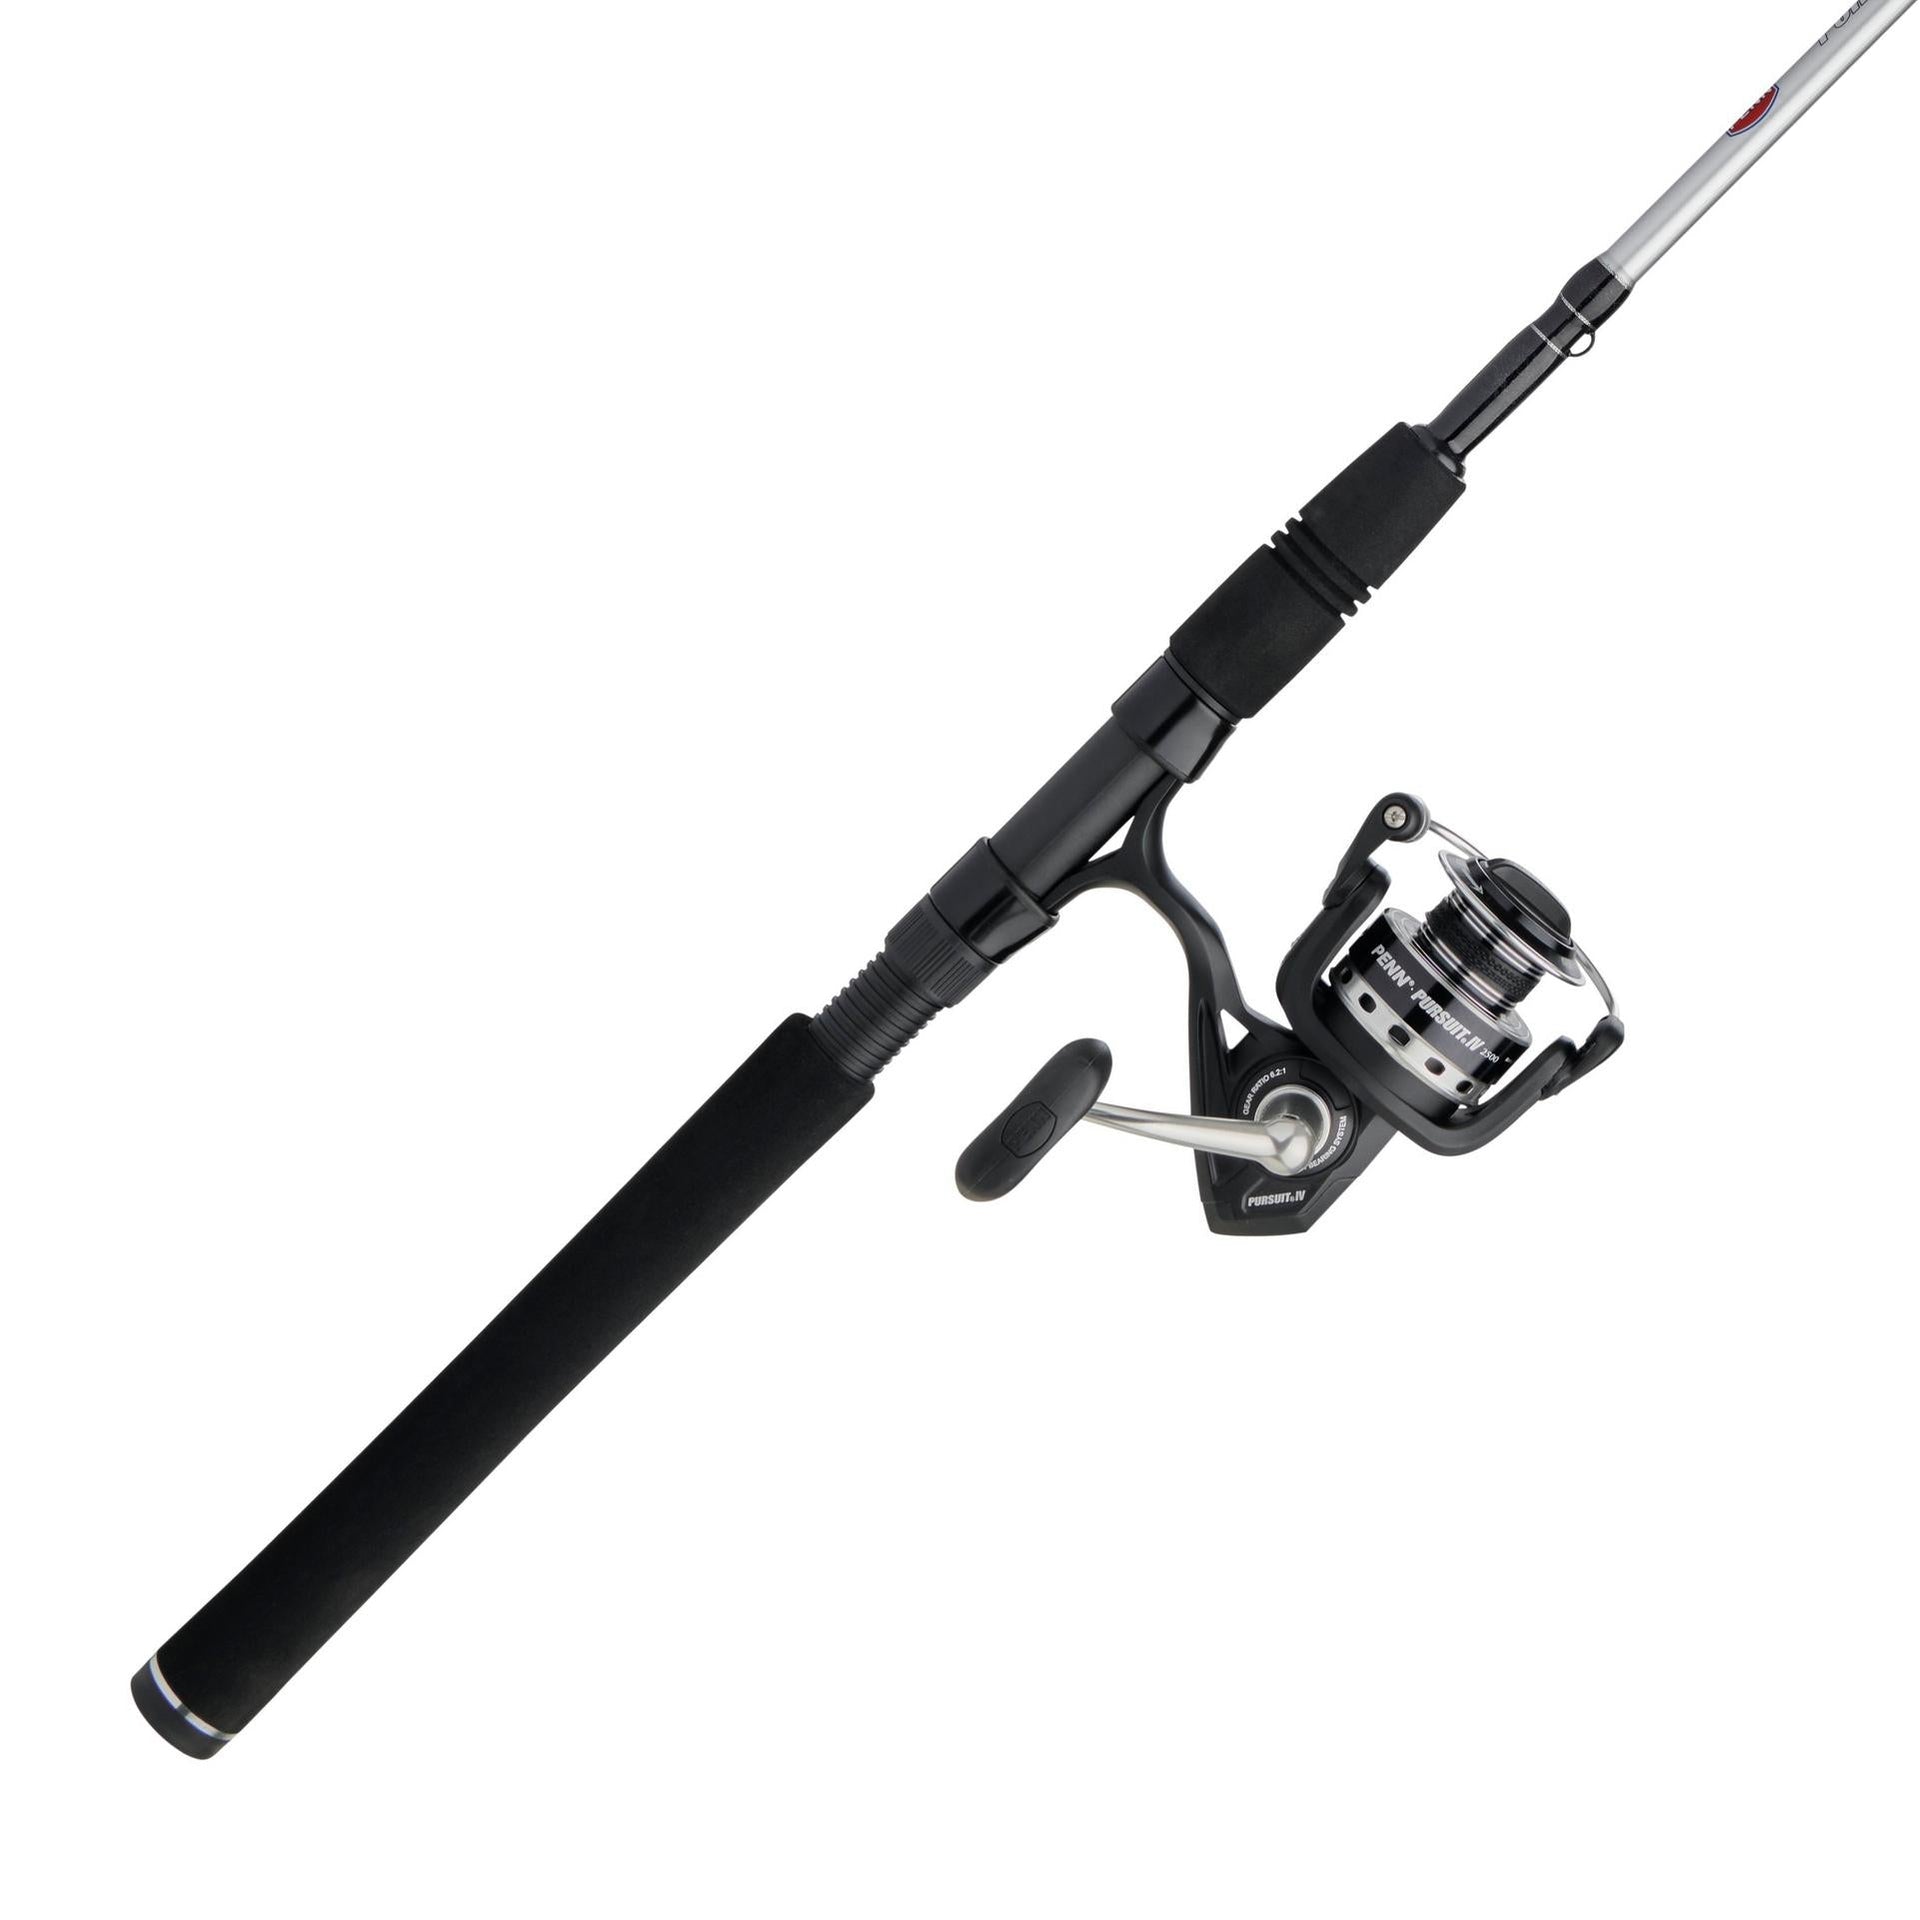 Mid priced reel bearing upgrade - Fishing Rods, Reels, Line, and